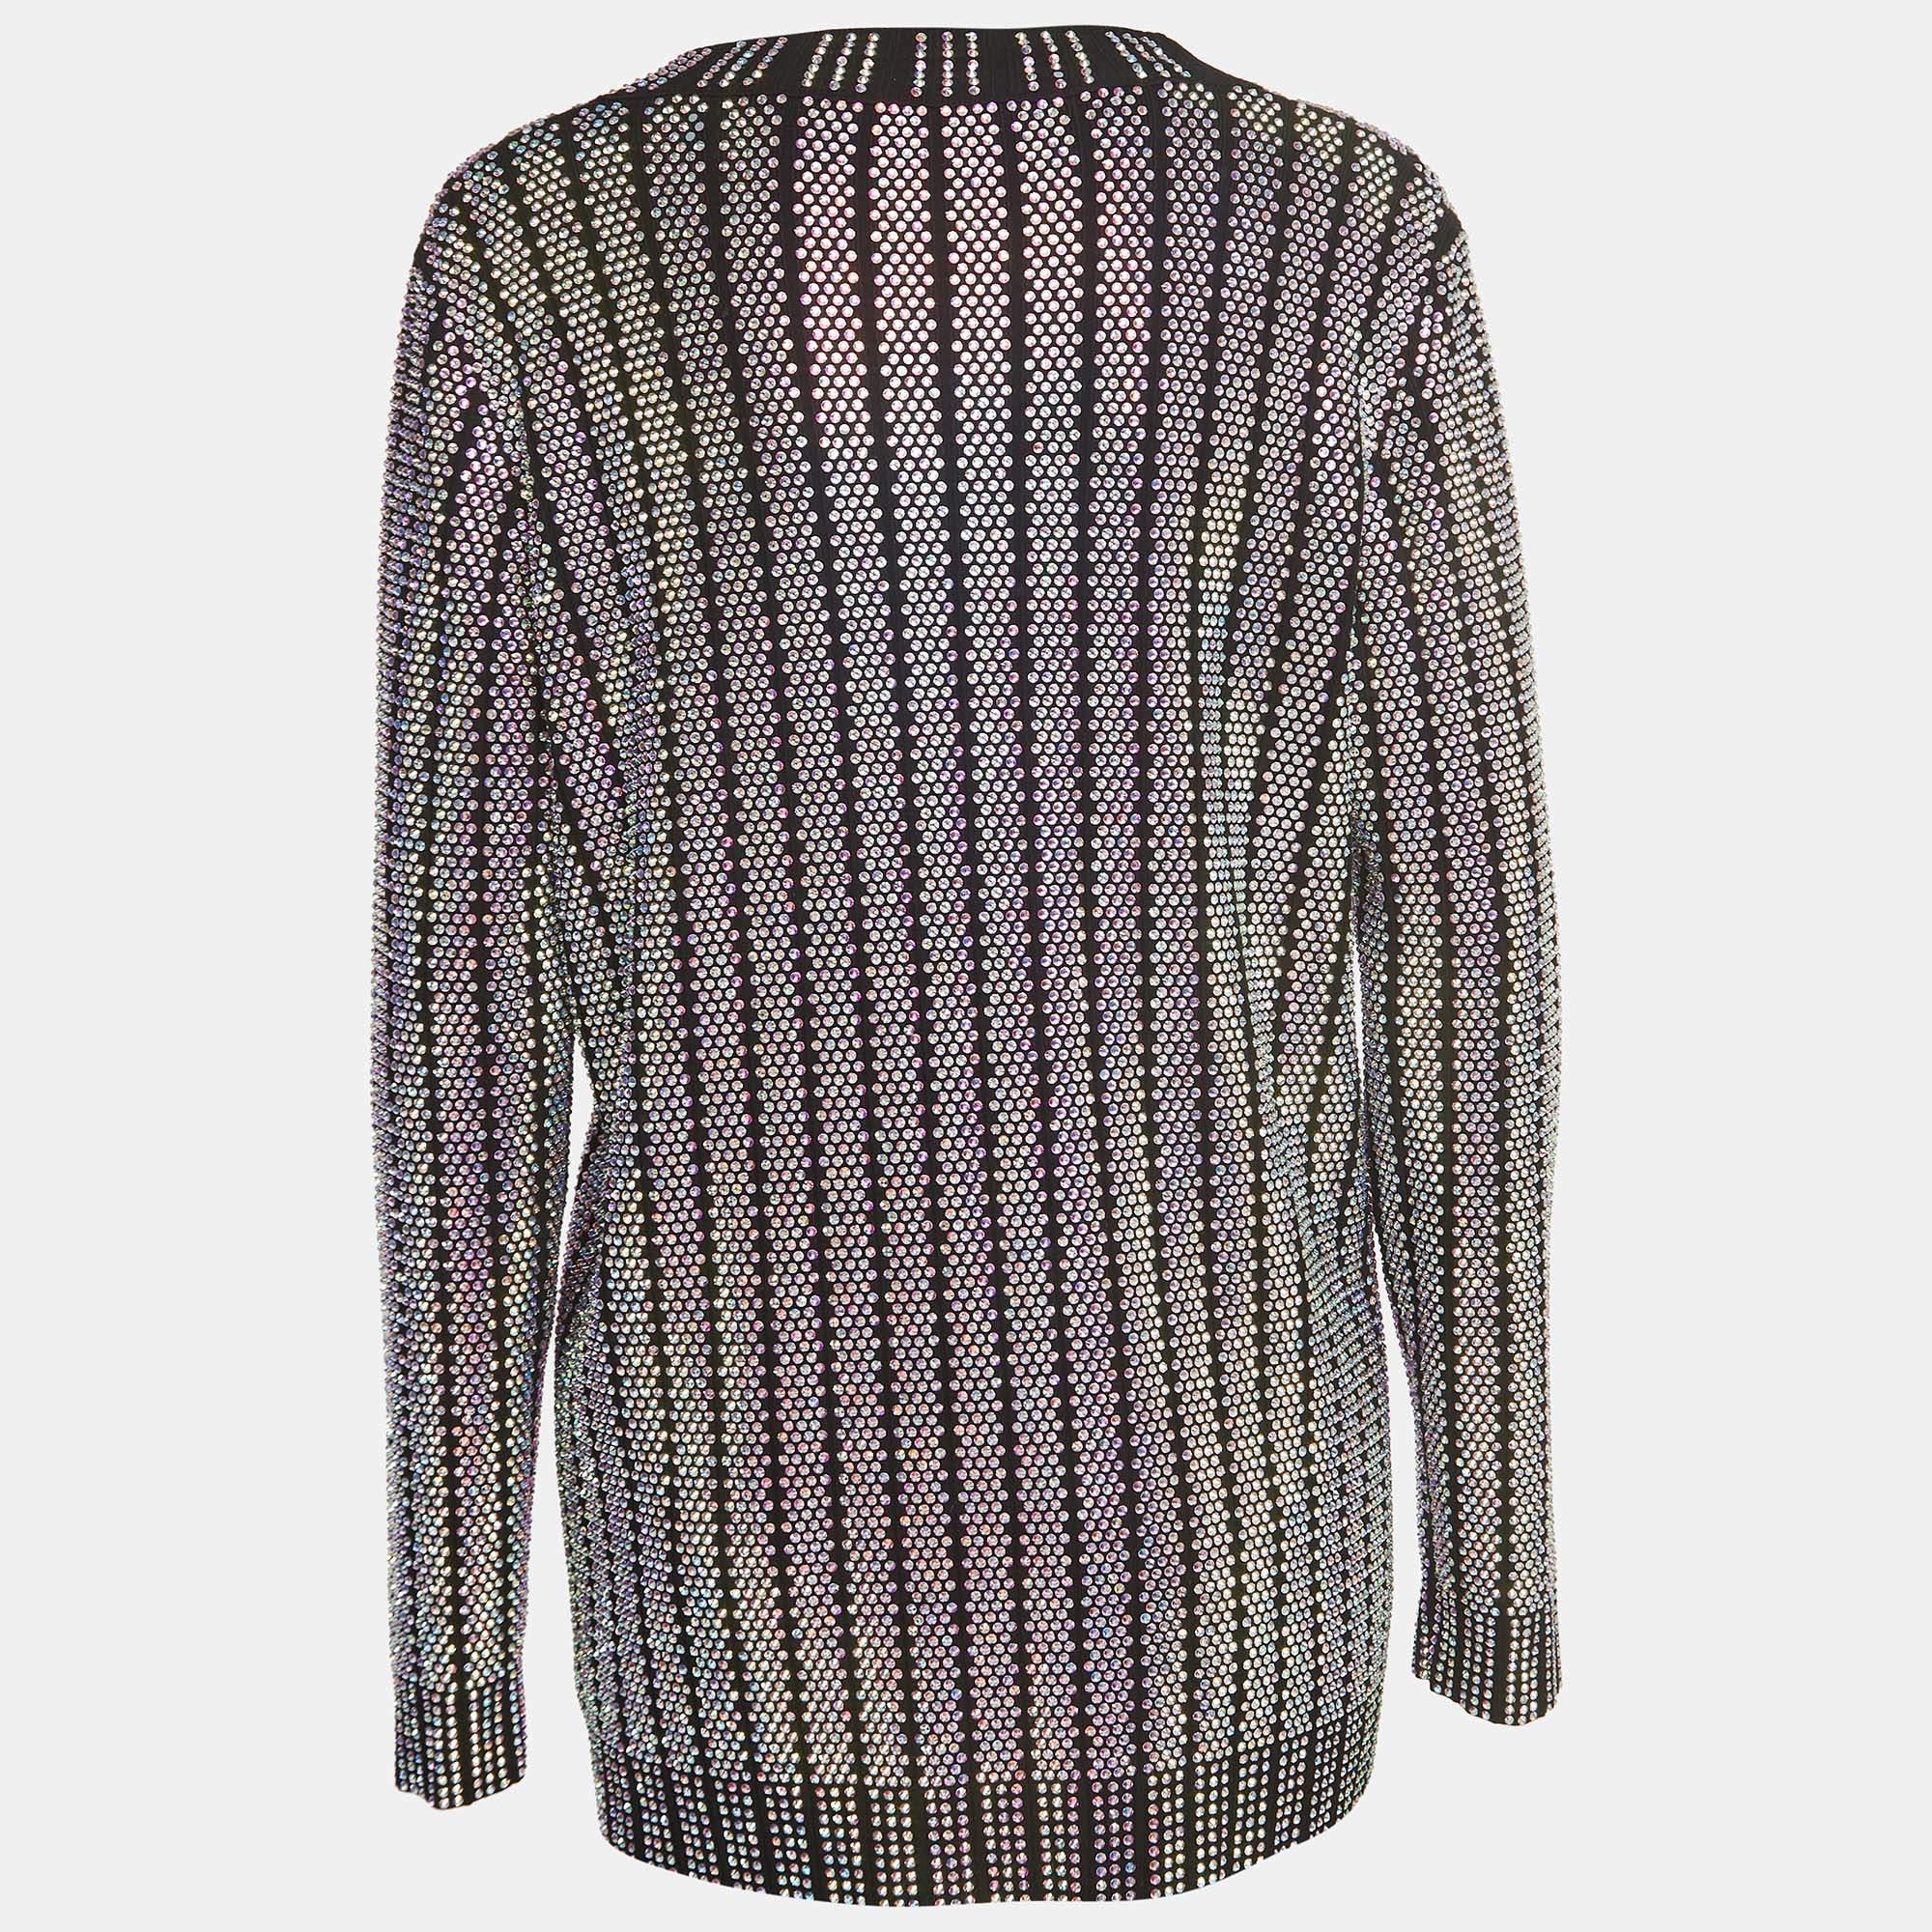 Stay warm and stylish all day as you step out wearing this cardigan from Gucci. It features an attractive design and a superb fit. Complement this cardigan by wearing it with your favorite pair of pants.

